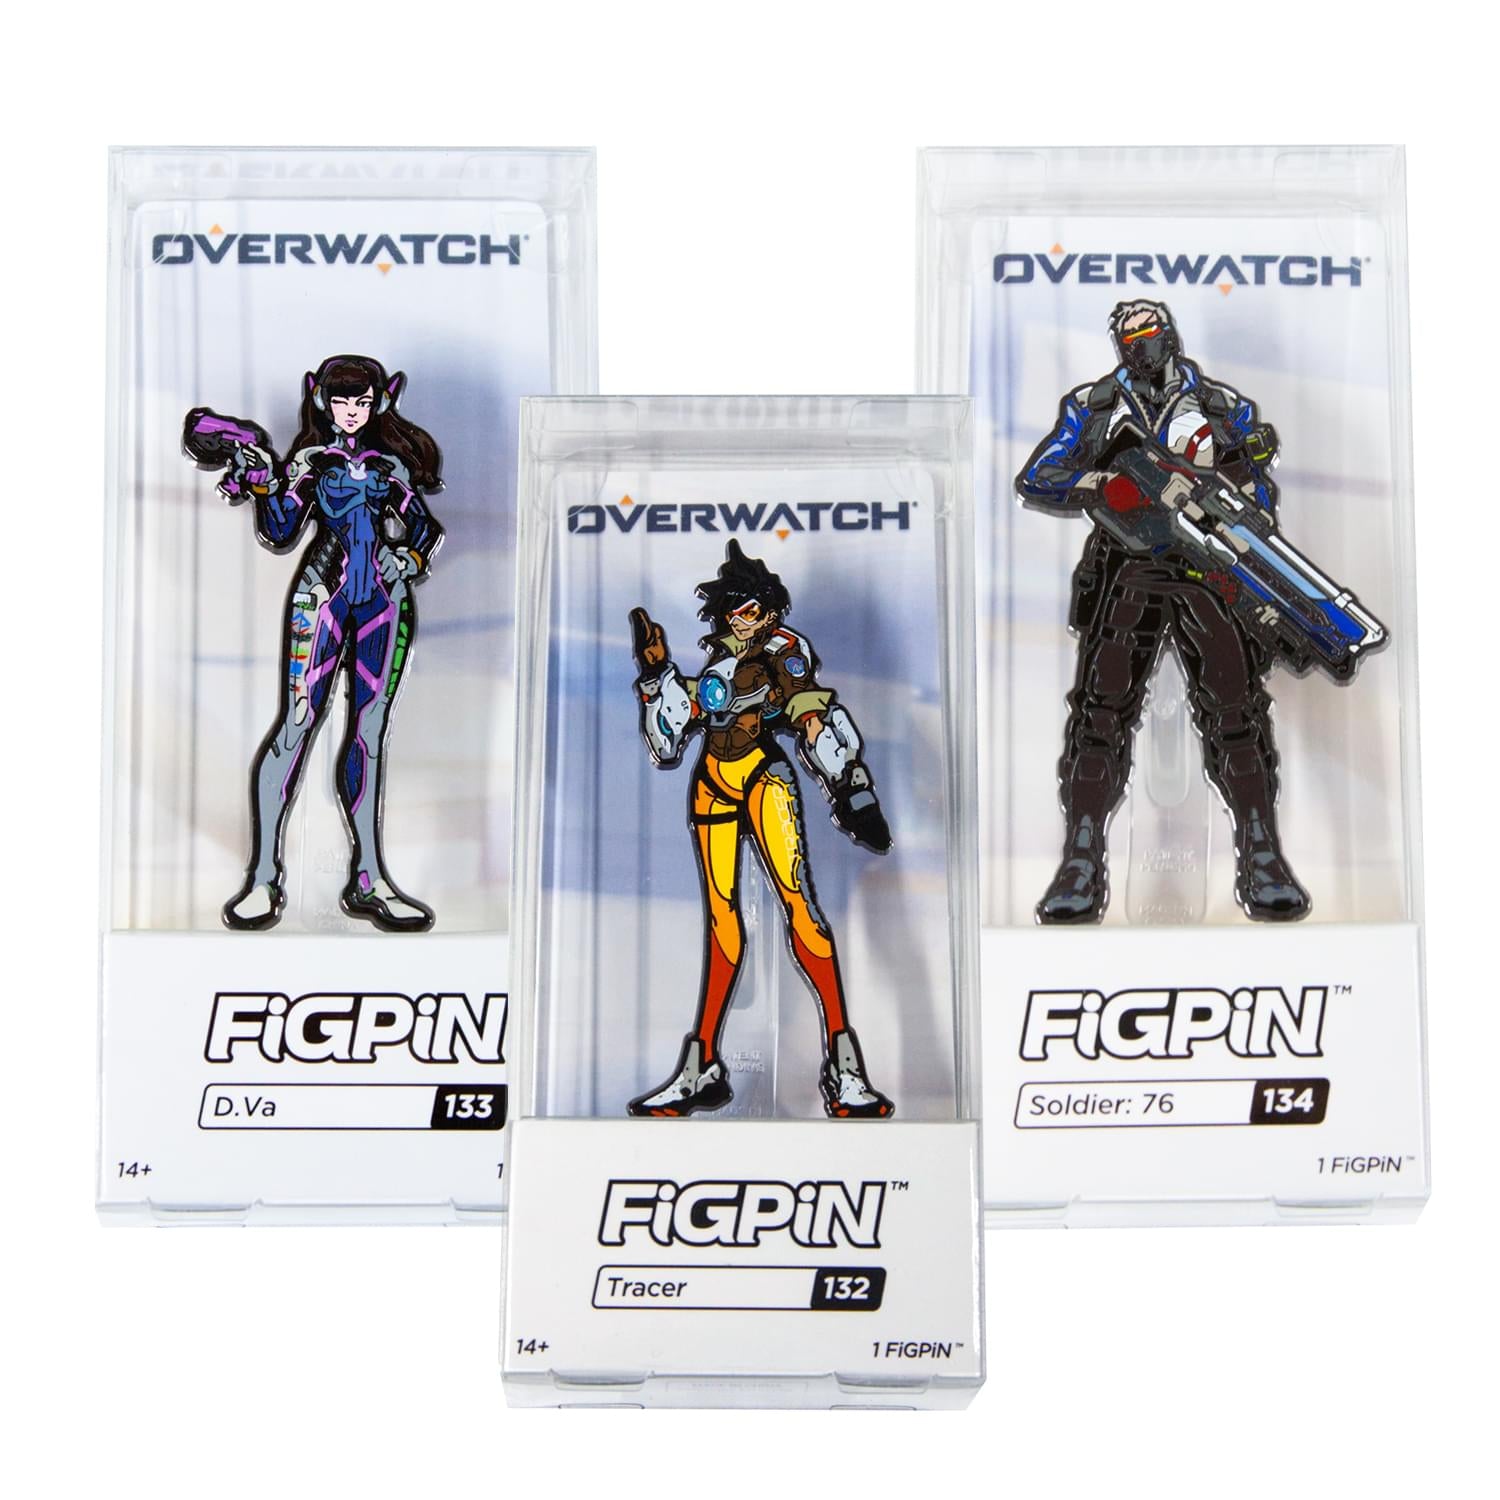 Overwatch Official Hero Pin Set | D. Va, Tracer, & Soldier 76 Pins | Set of 3